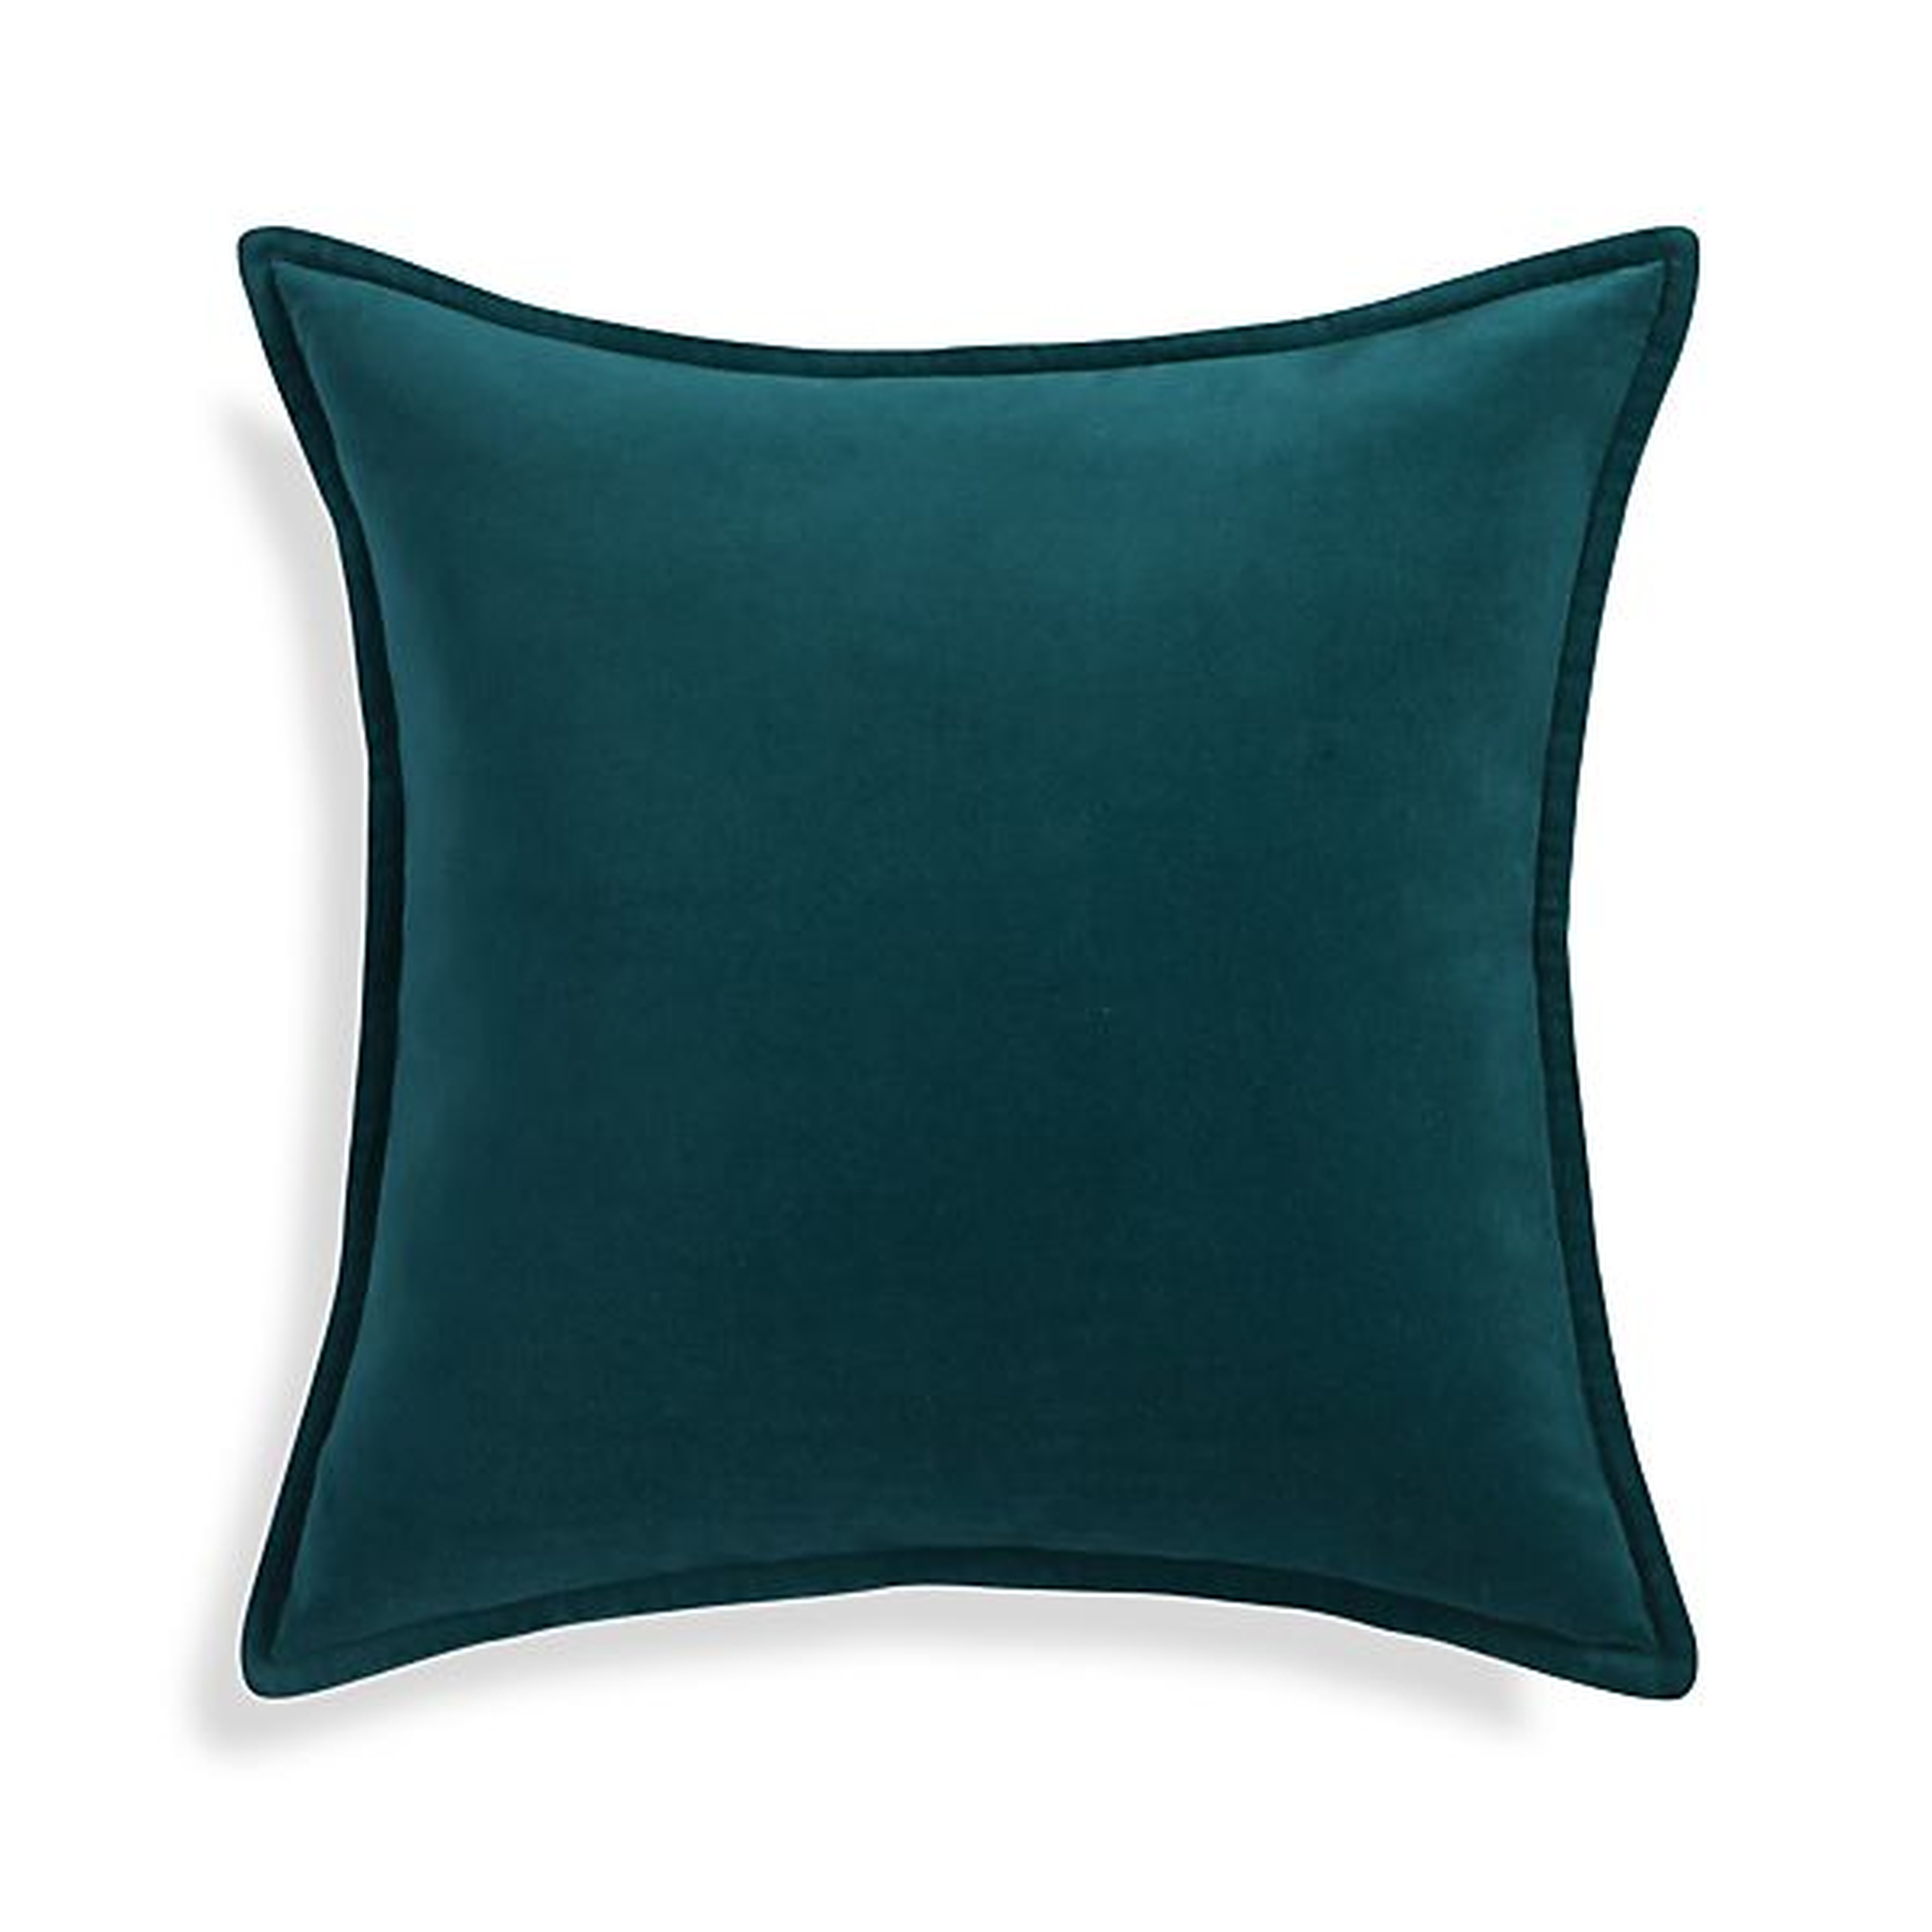 Brenner Teal Blue 20" Pillow with Feather-Down Insert - Crate and Barrel